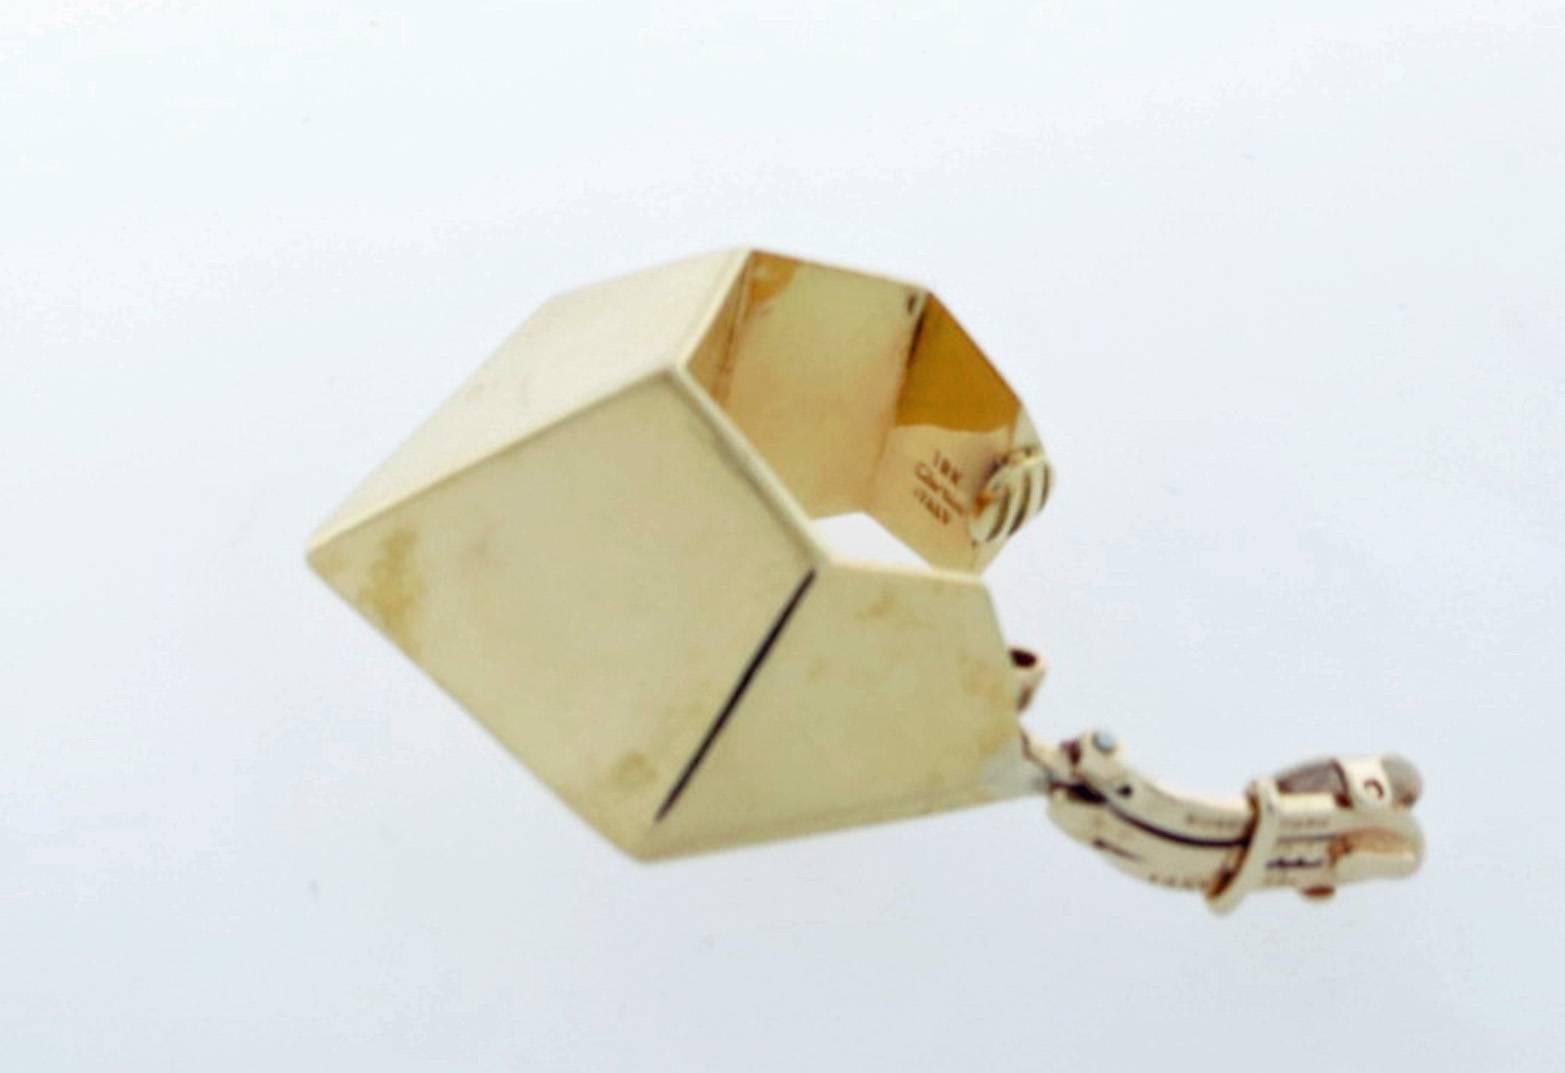 18kt. yellow gold Cubist design earrings made by Cartier Italy. Each earring measures approx 1 1/2 inches in length and has 14kt. yellow gold clip backs. The earrings are circa 1960.